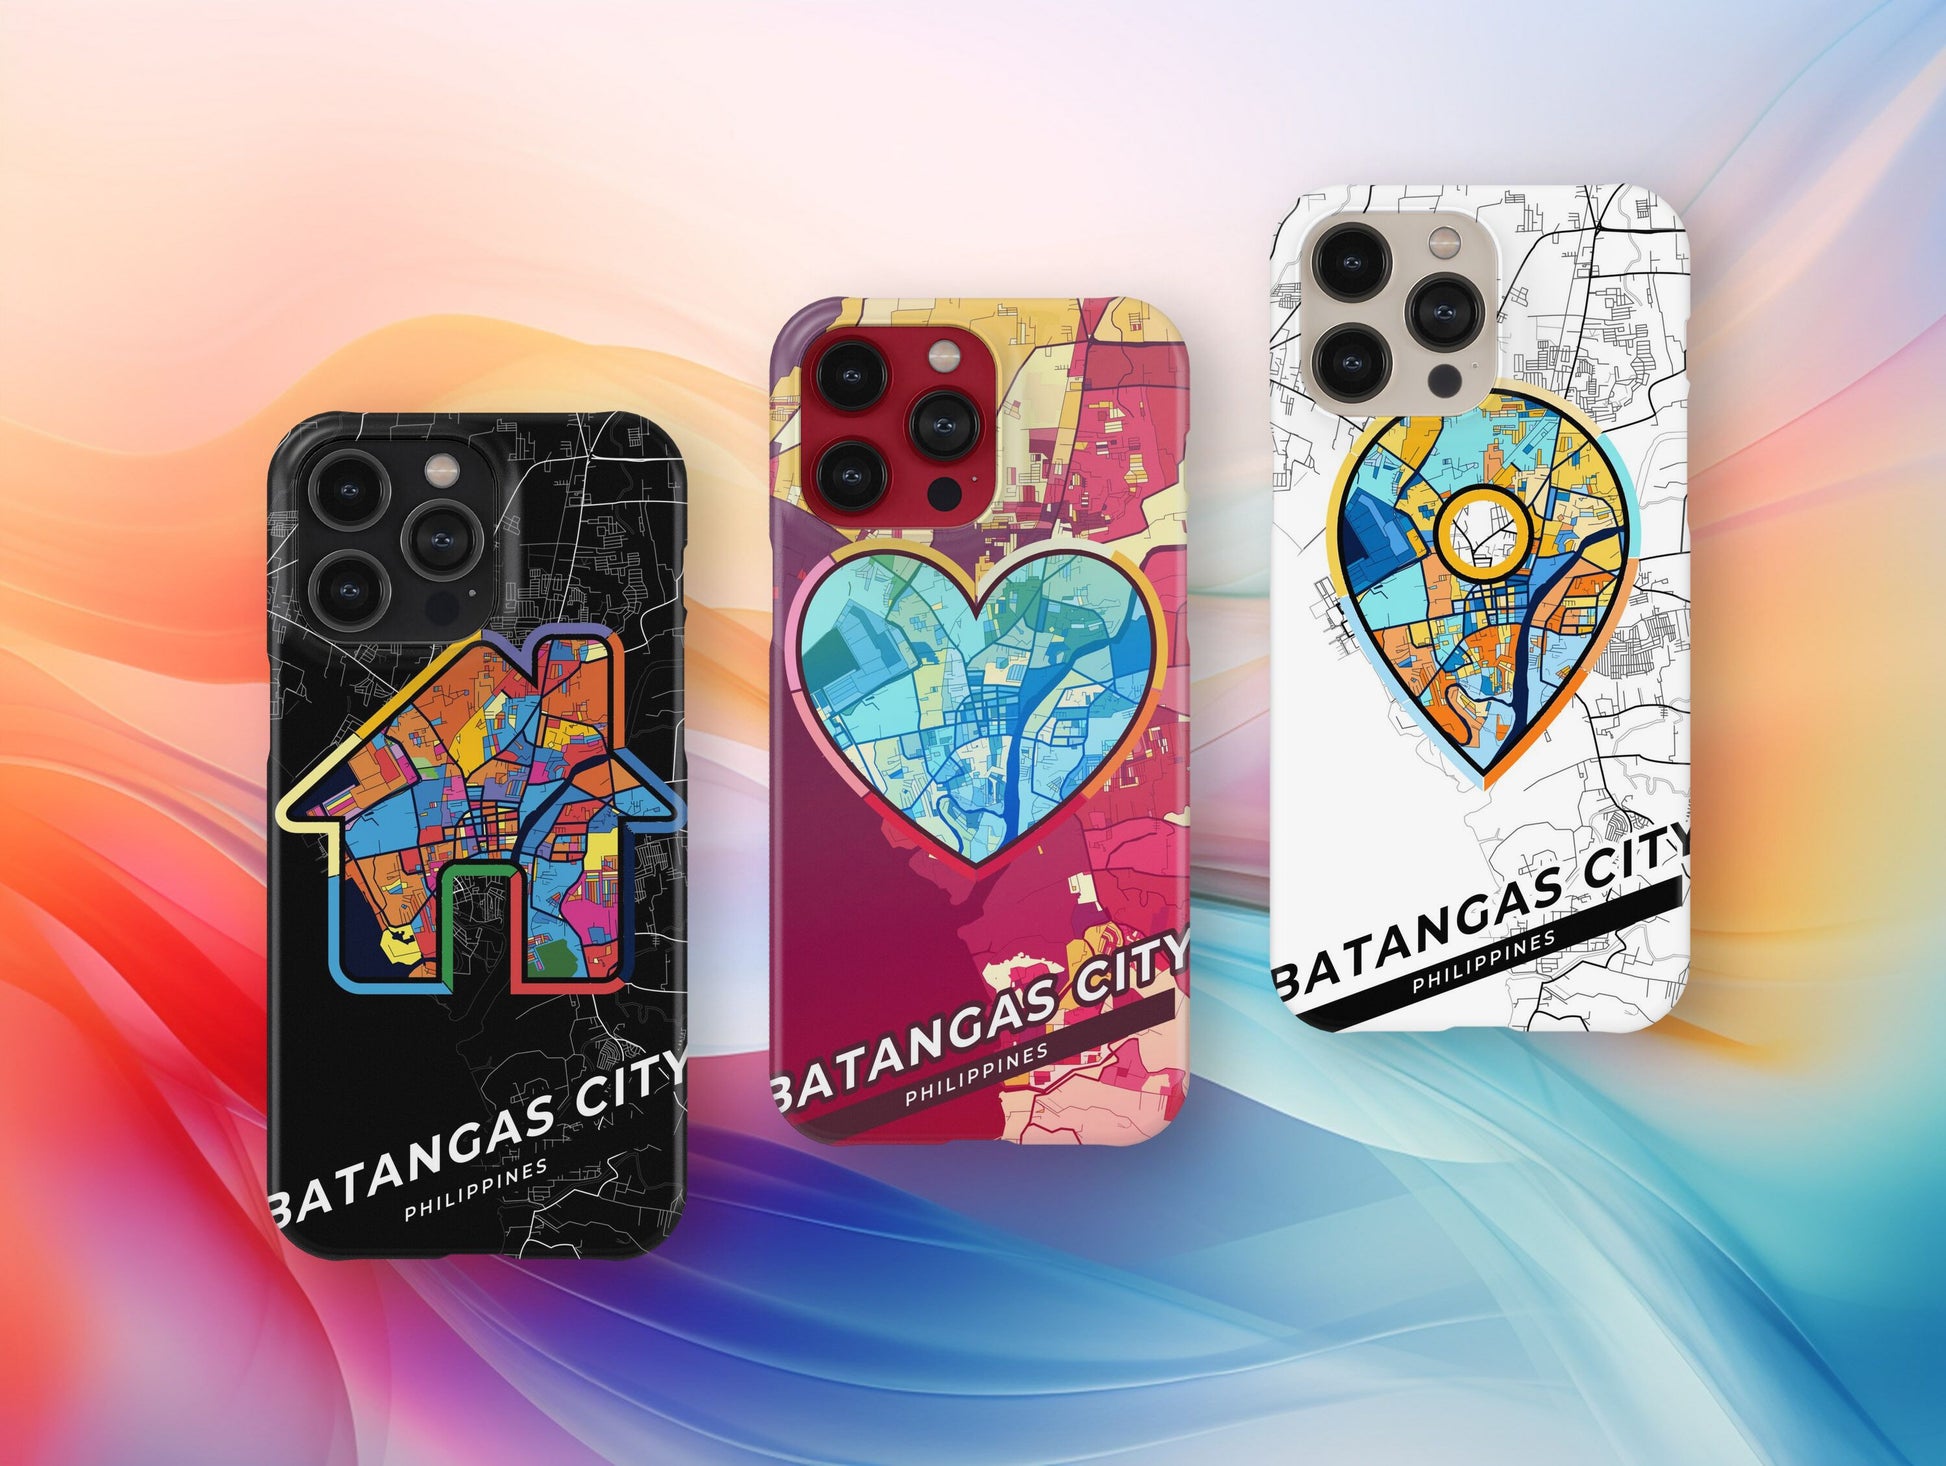 Batangas City Philippines slim phone case with colorful icon. Birthday, wedding or housewarming gift. Couple match cases.